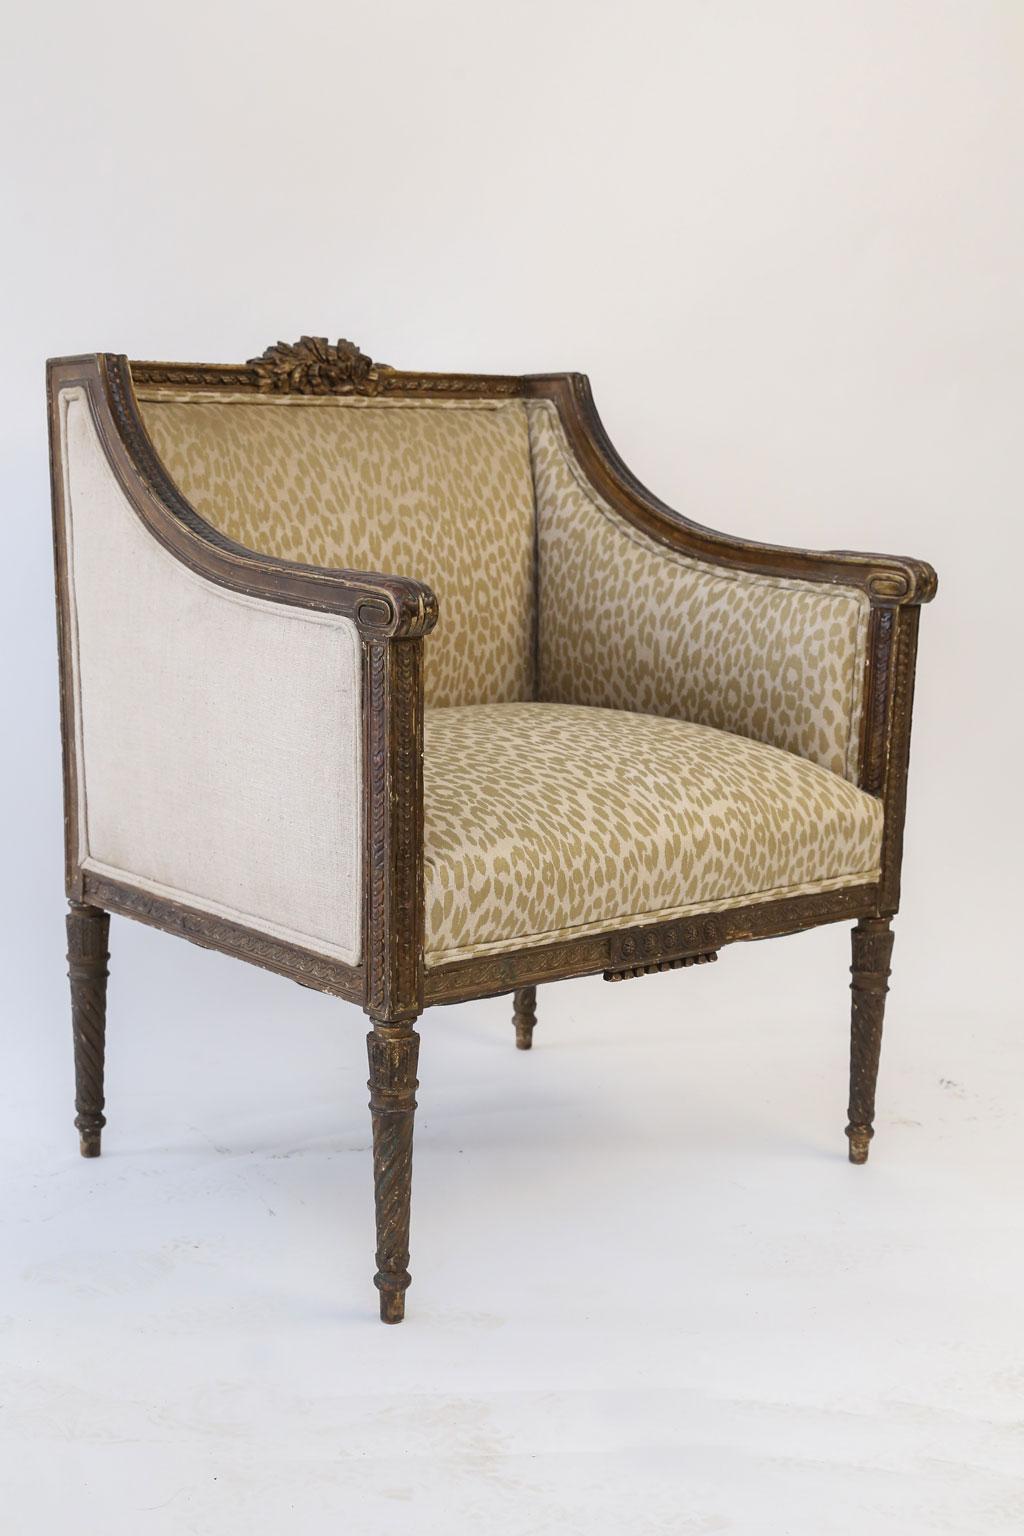 Hand carved Louis XVI bergère armchair from France, upholstered in vintage fabric. This 18th century French armchair is hand carved in fruitwood (probably walnut) circa 1775-1795 with remnants of darkened gilt and gesso.

Note: Original/early finish